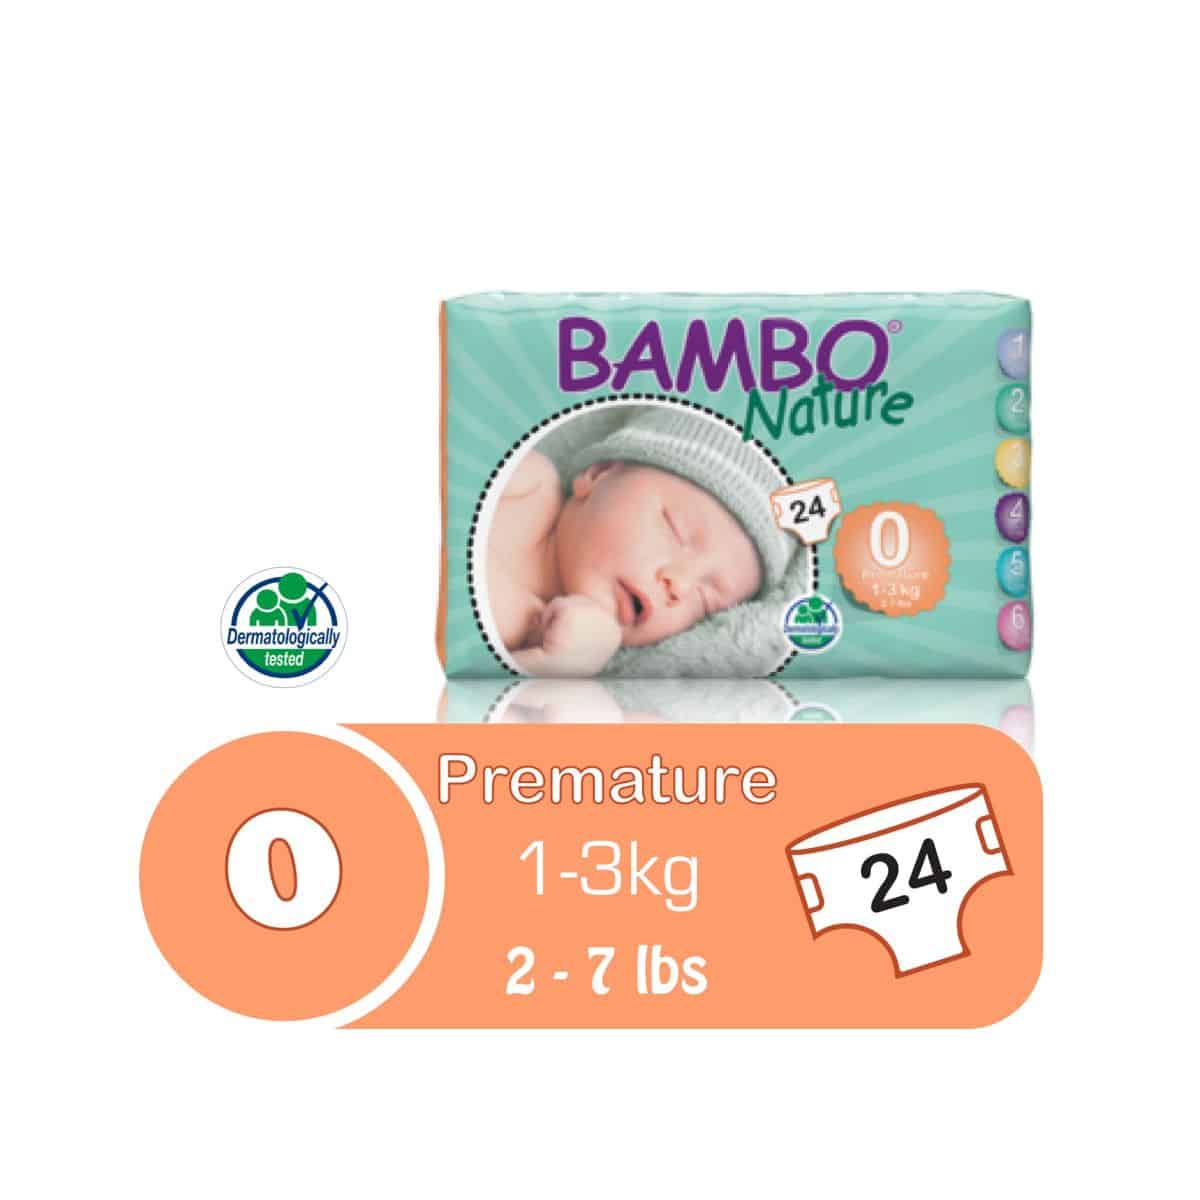 Buy Bambo Nature Junior 12-22 Kg, Size 5, 27 counts online with Free Shipping at Baby Amore India, Babyamore.in